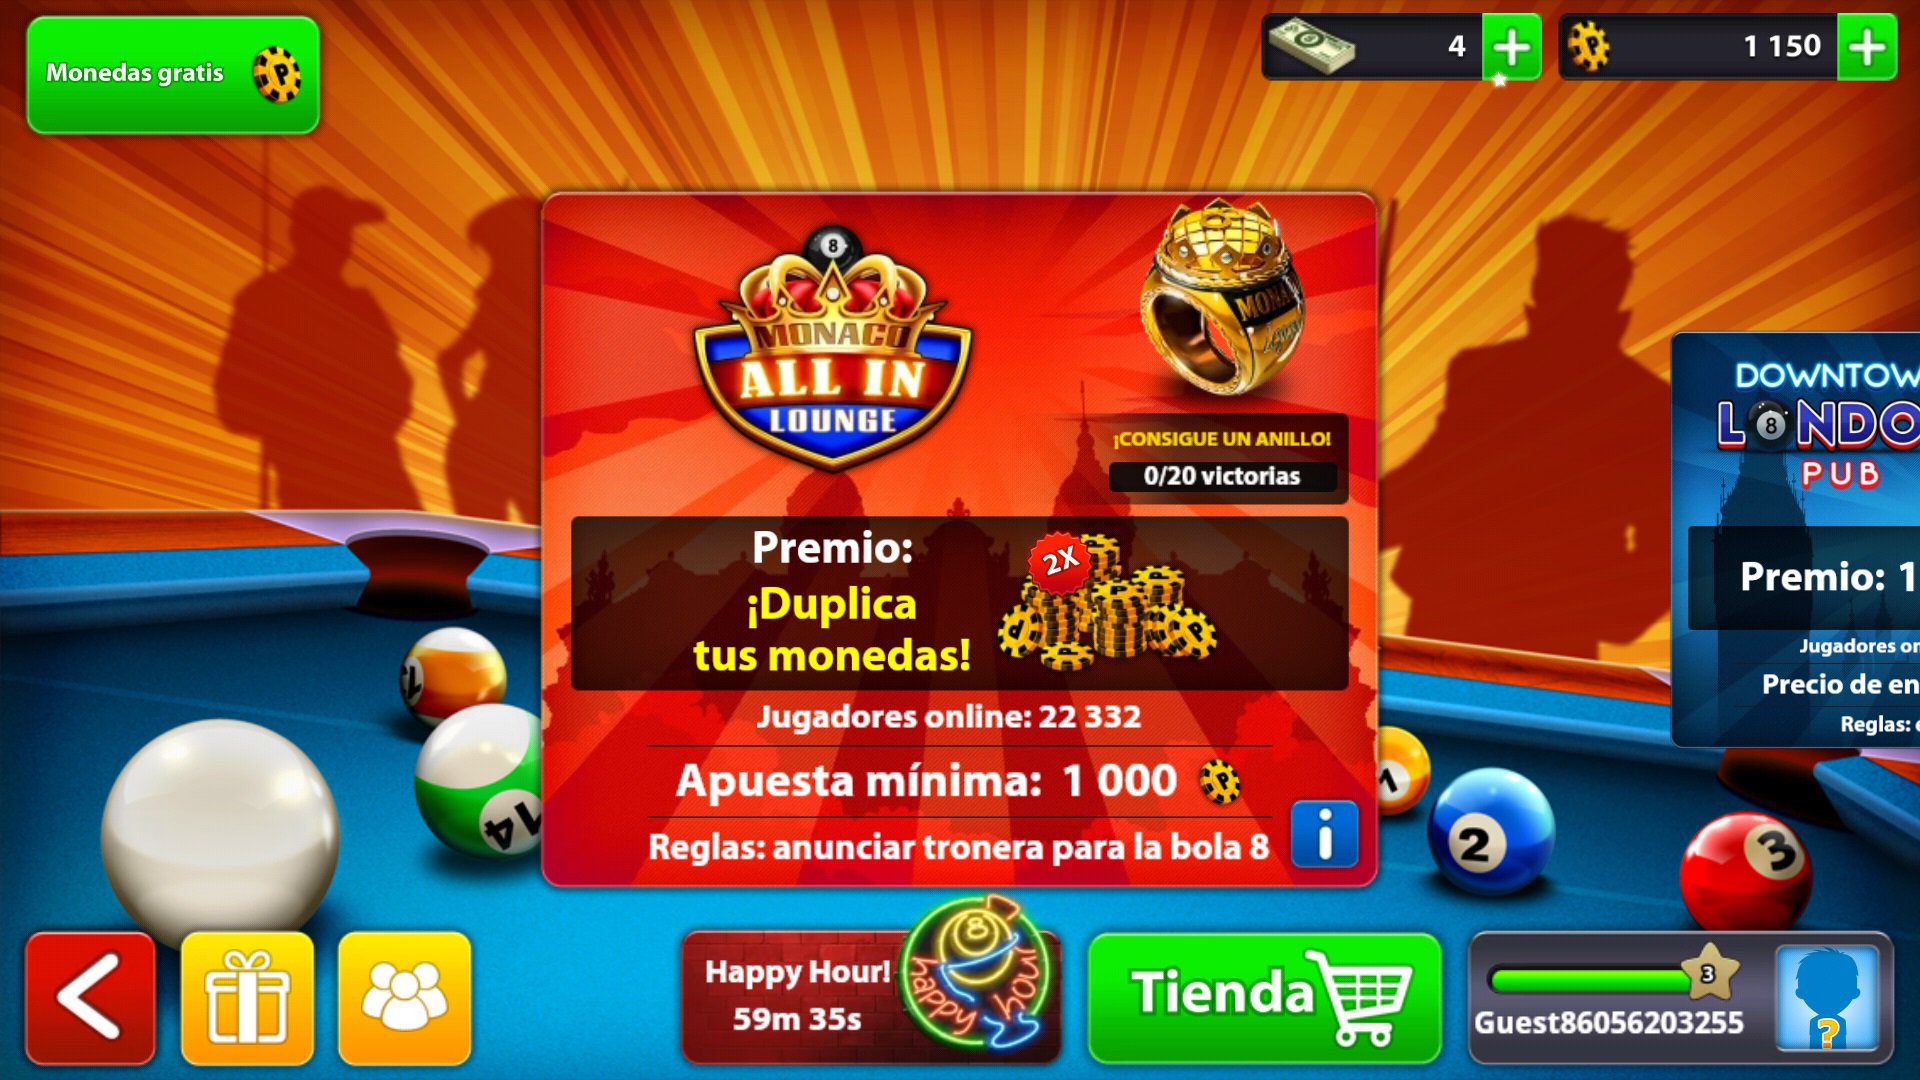 8 ball pool game download for mac youtube